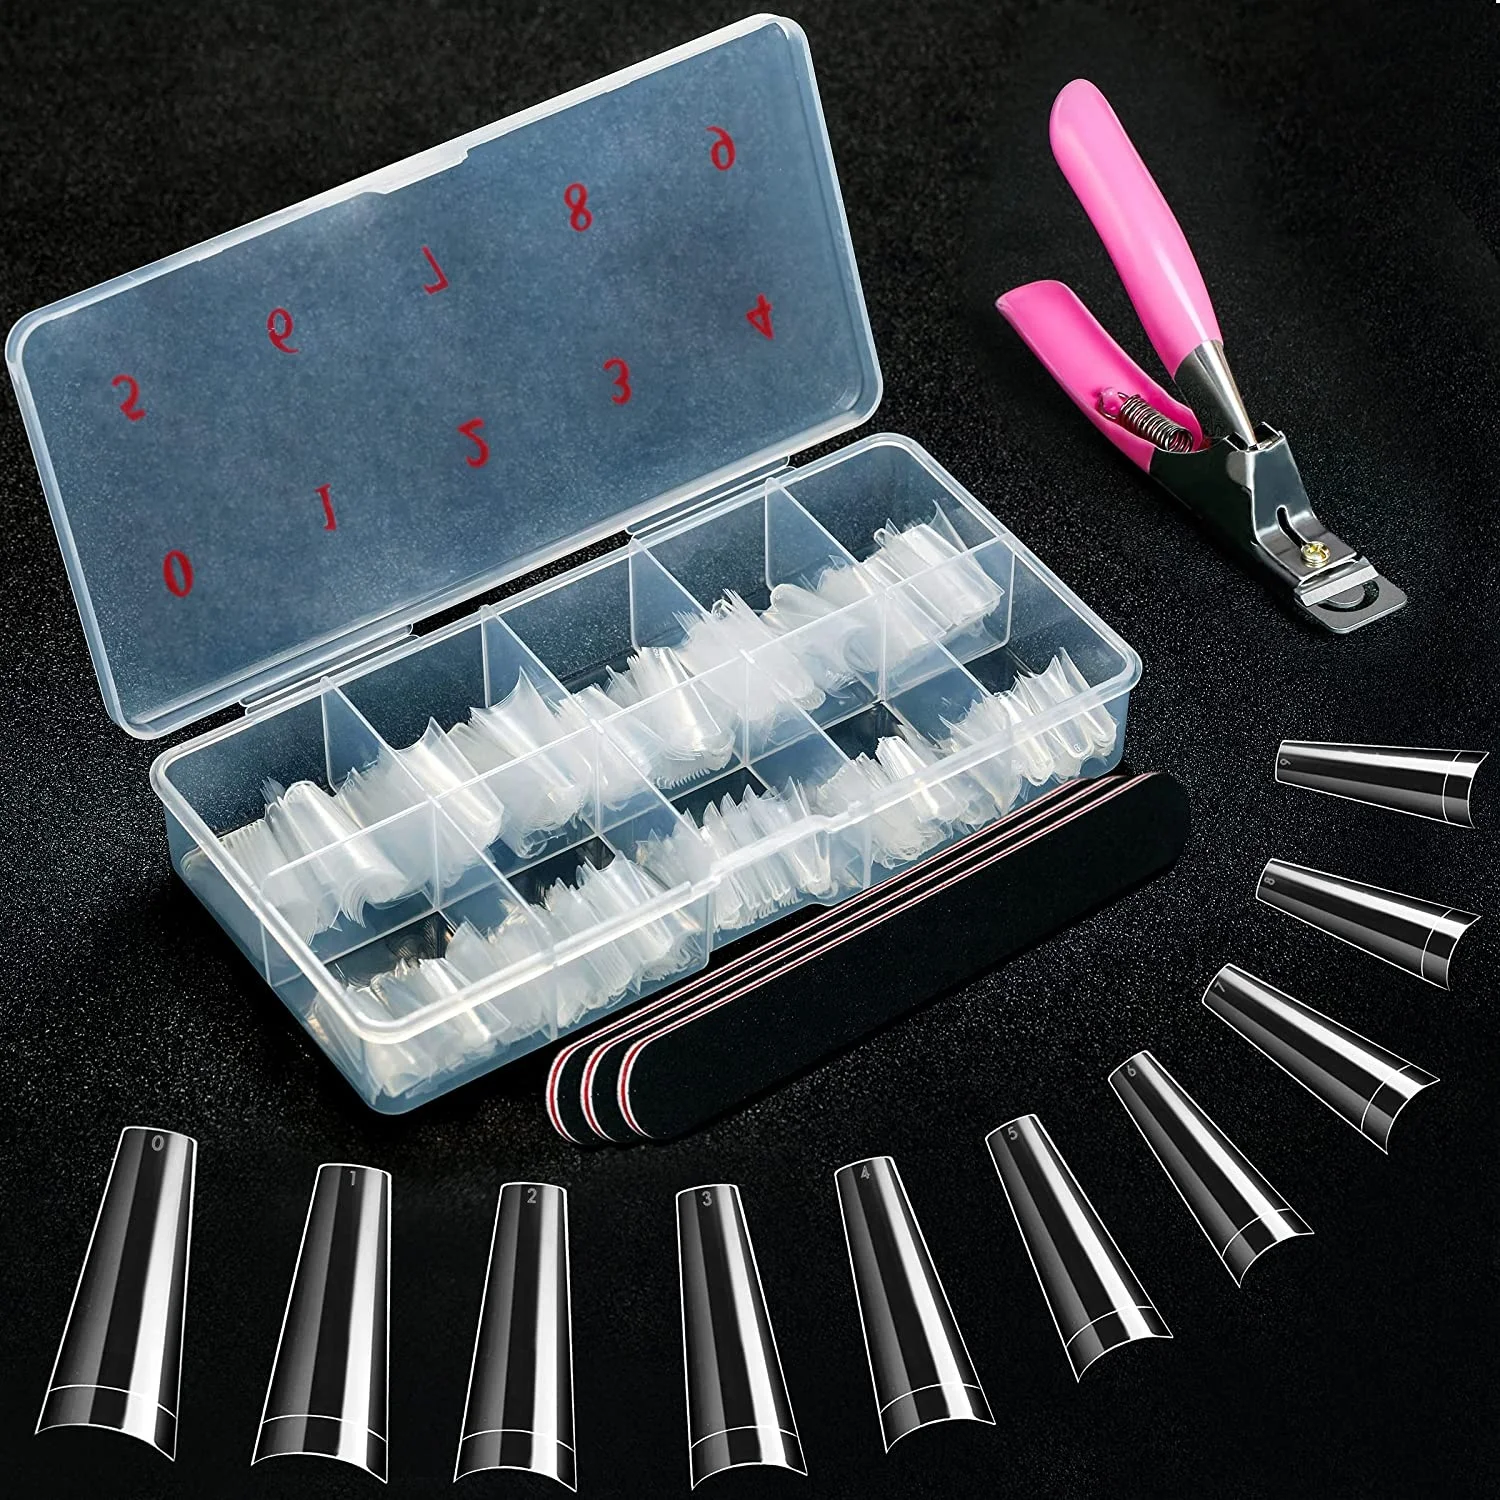 

550pc/Box Nail File Clipper Ballerina ClearHalf Cover XL False Nails with 10 Sizes Box No C Curve Coffin Nail Tip Tool Set, Picture